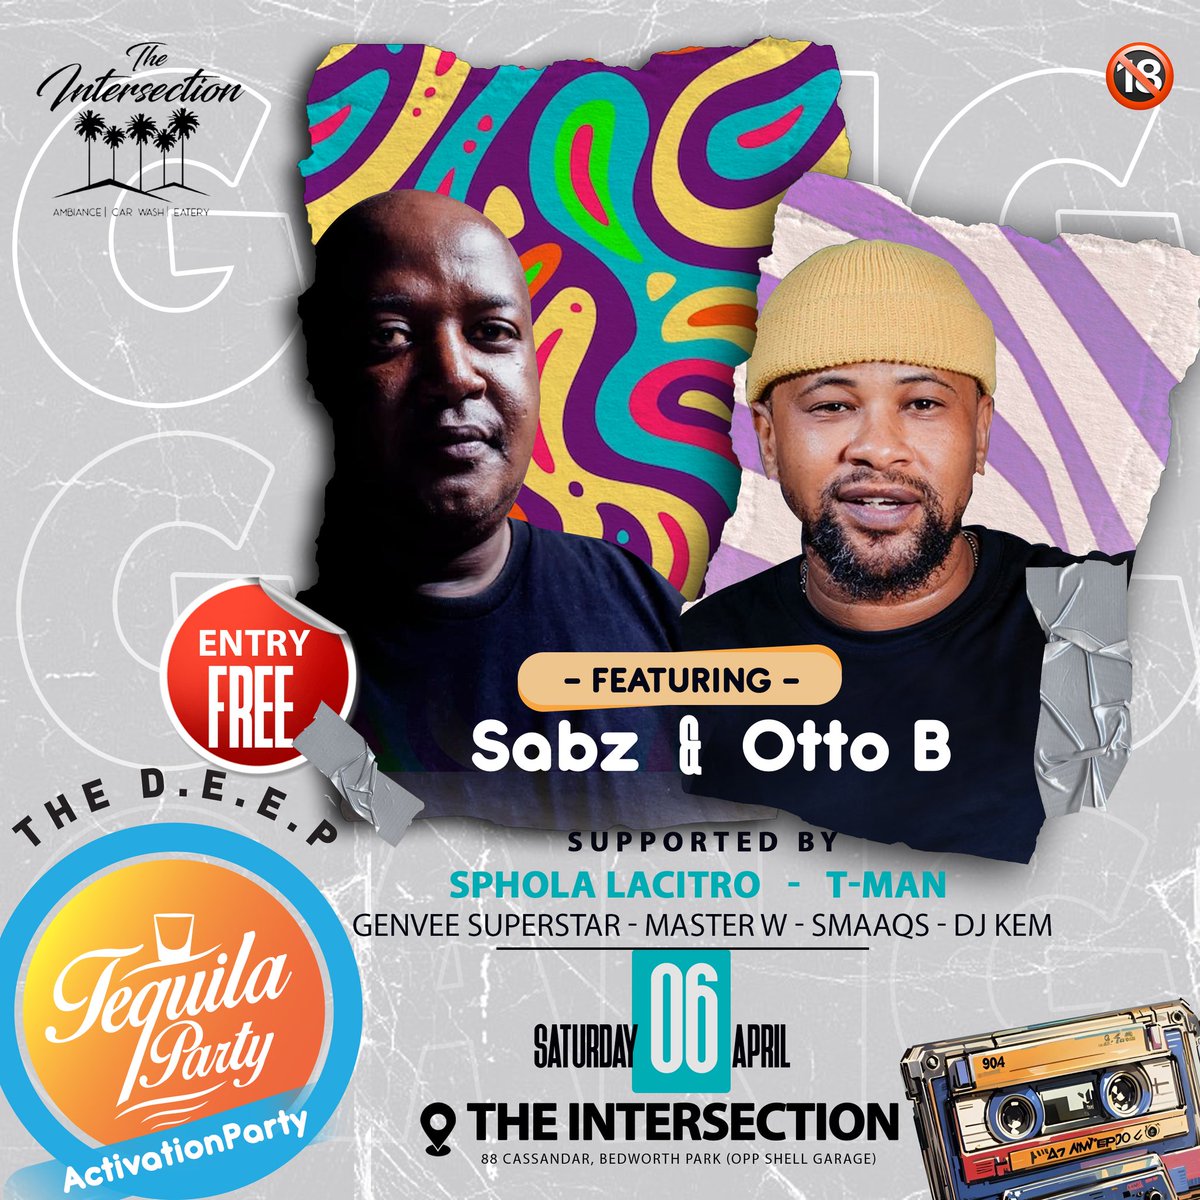 This is where you can catch THE SOUL TRAIN today....

📍 @FireandIceME Menlyn  #WeGotSoulSaturdays

📍@the_intersection_bedworthpark Vaal #TheDeep #ActivationParty

Let's make it hotttttt 🔥🔥🔥🔥🔥🔥

#WeGotSoul #SoulTrainInvasion🚂🚂🚂